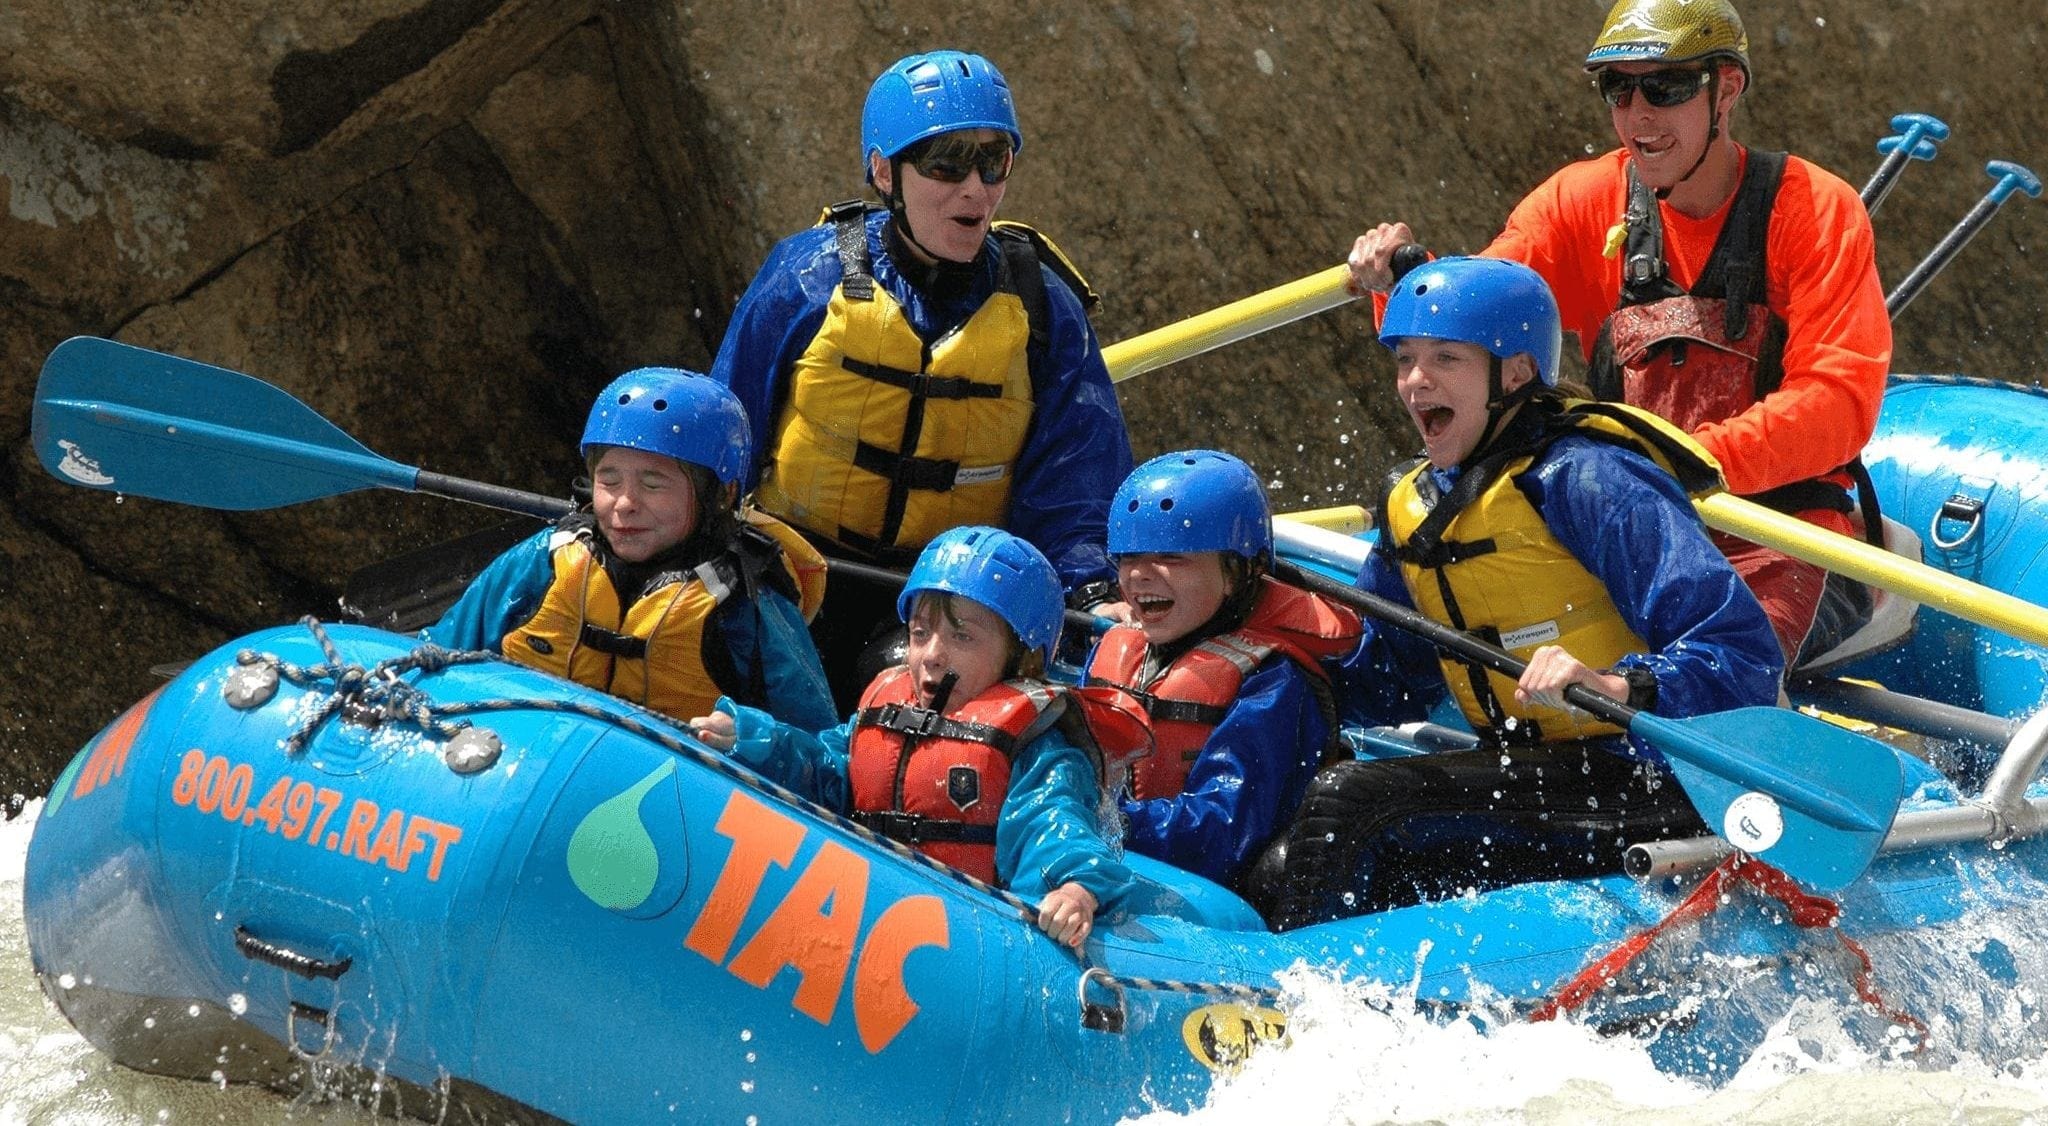 Rafting with kids in the Blue River in Breckenridge